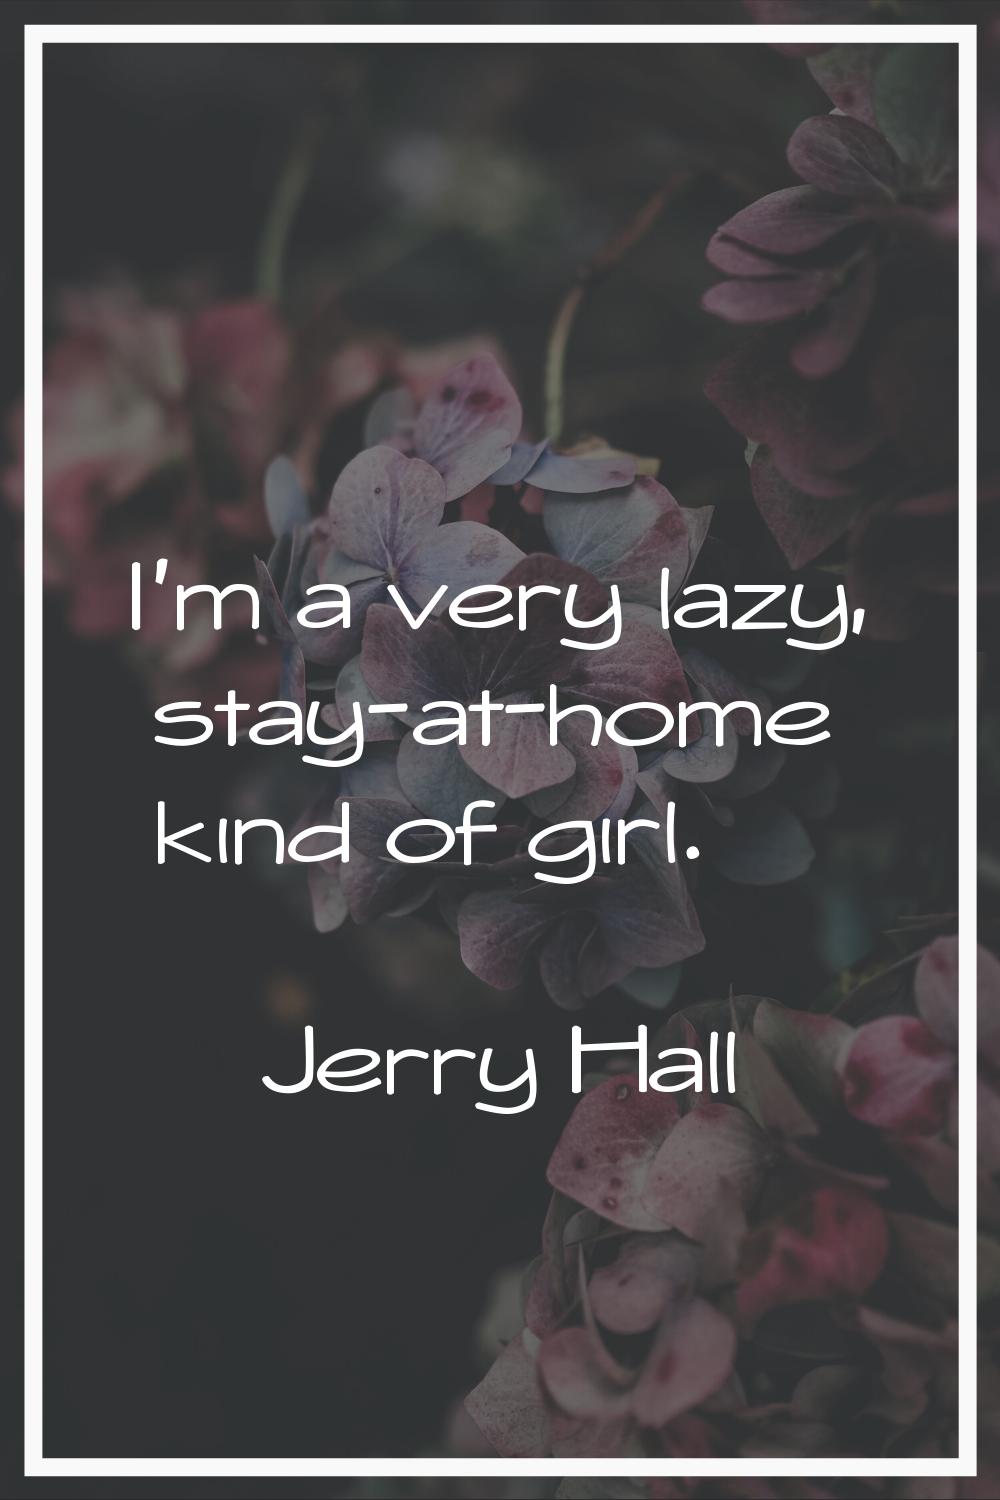 I'm a very lazy, stay-at-home kind of girl.